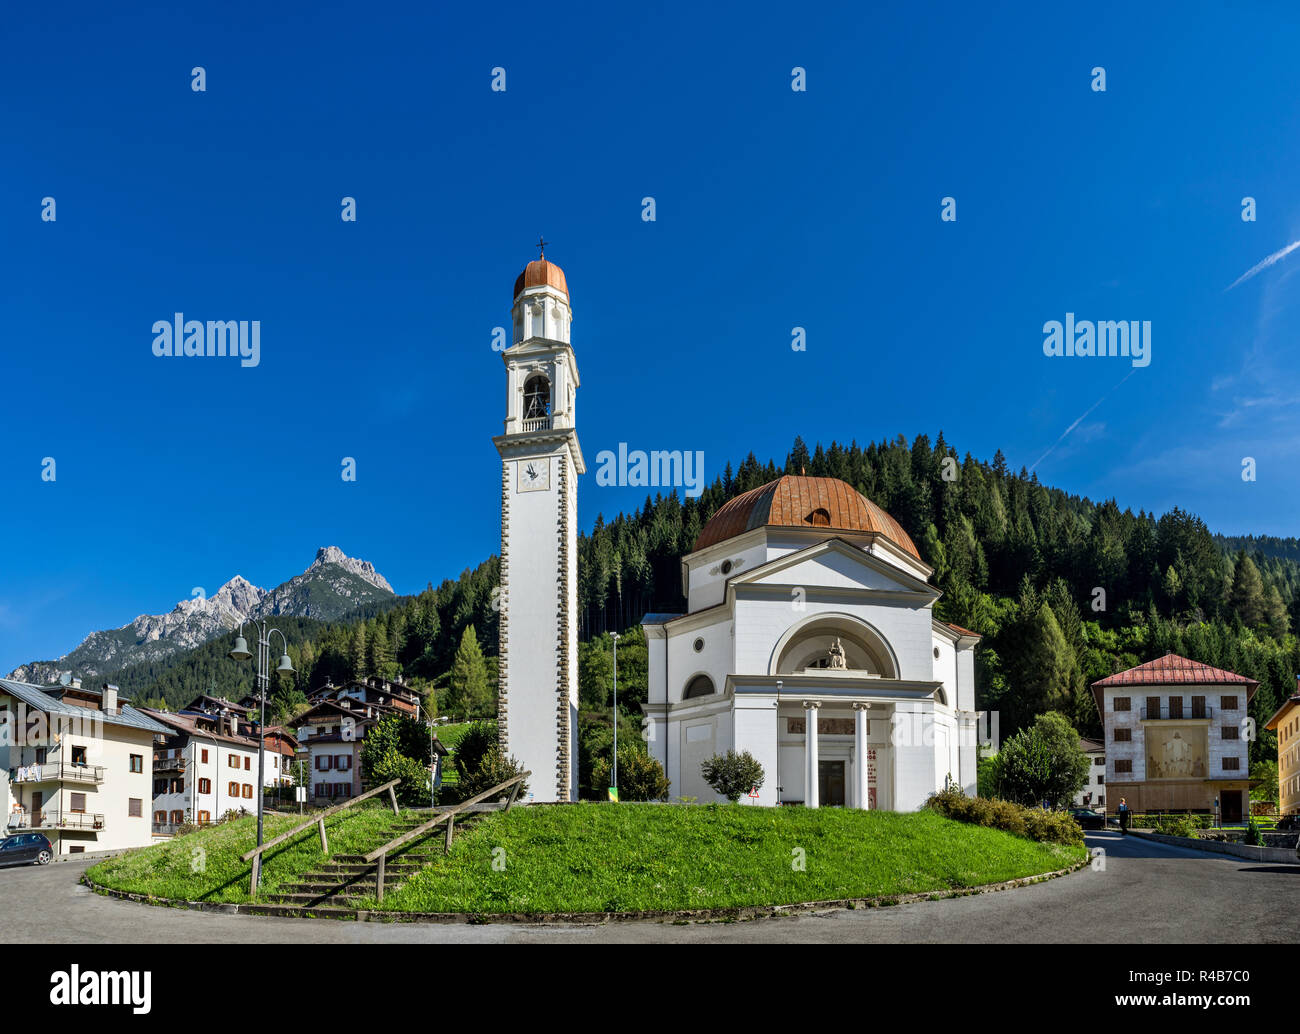 A church in the village of Auronzo di Cadore in the Dolomites region of Italy. Stock Photo